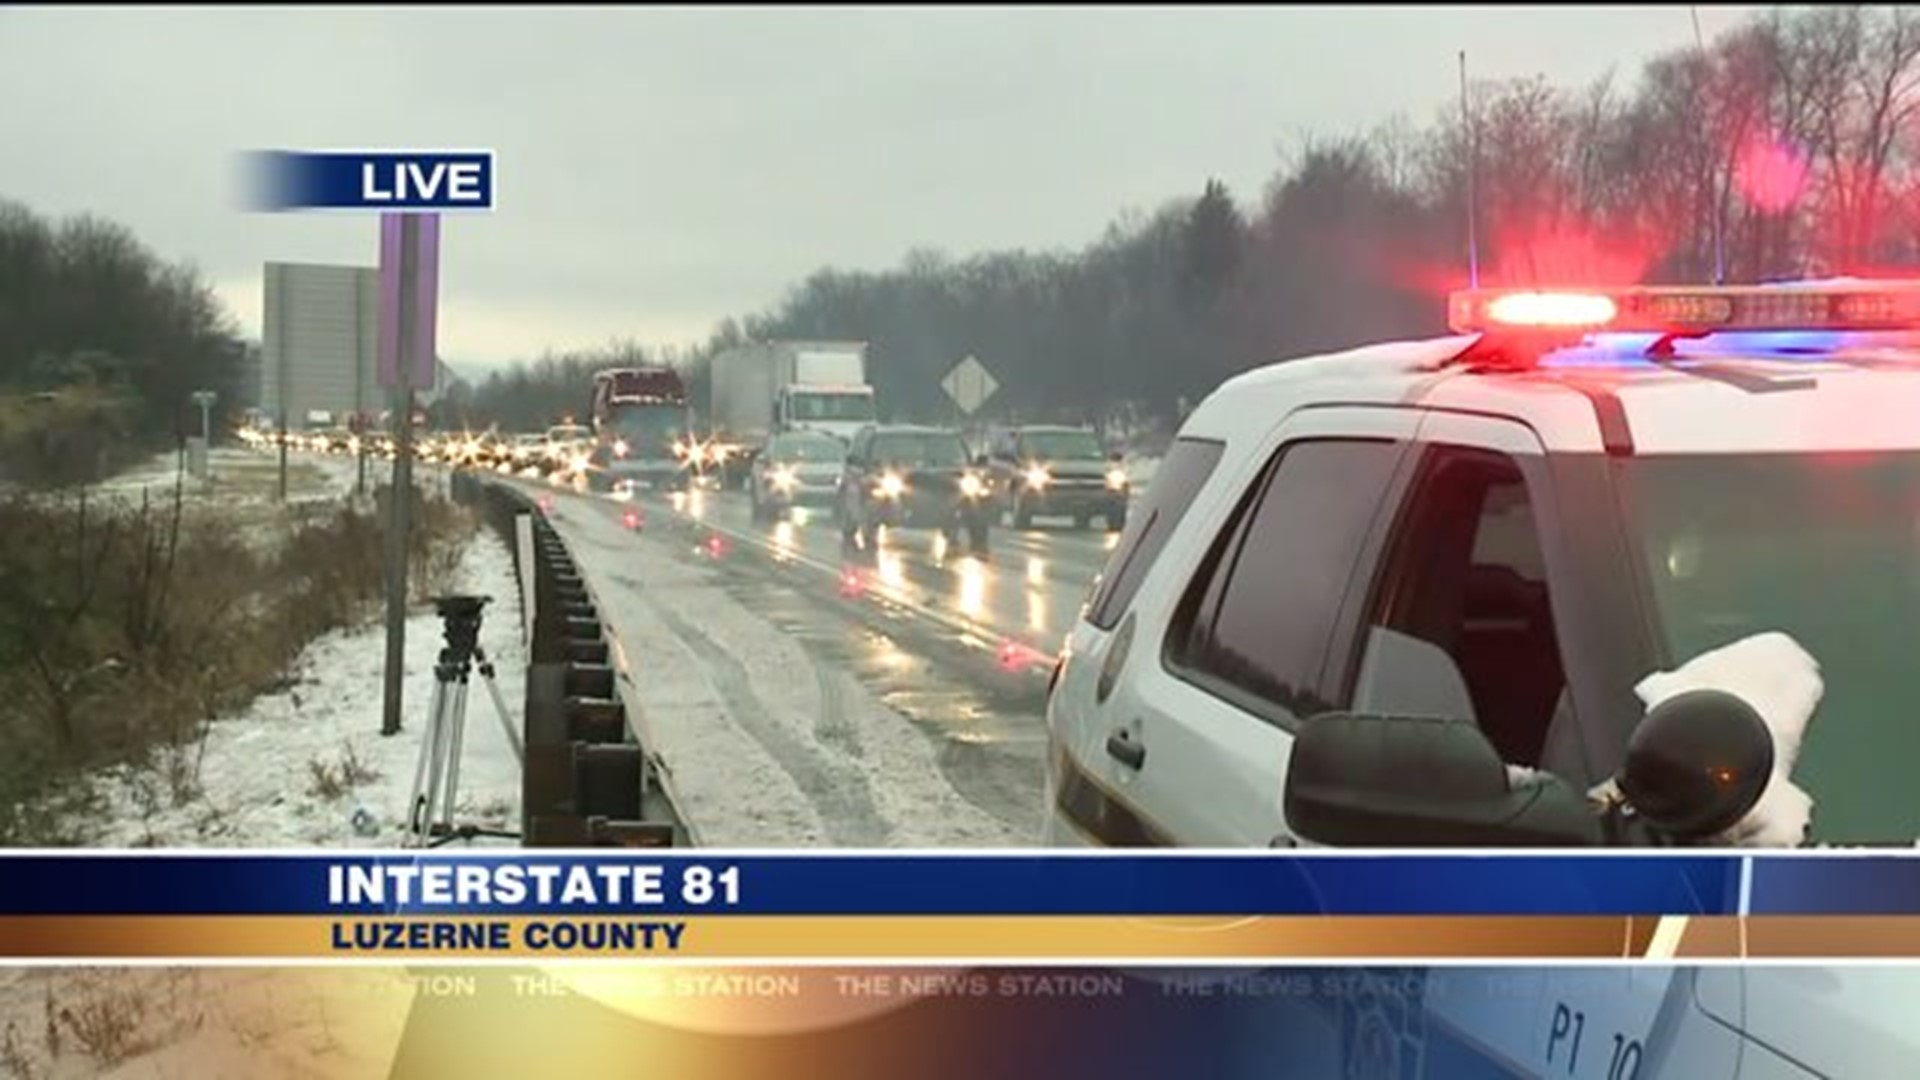 Traffic Slowed on Interstate 81 Due to Crash in Luzerne County